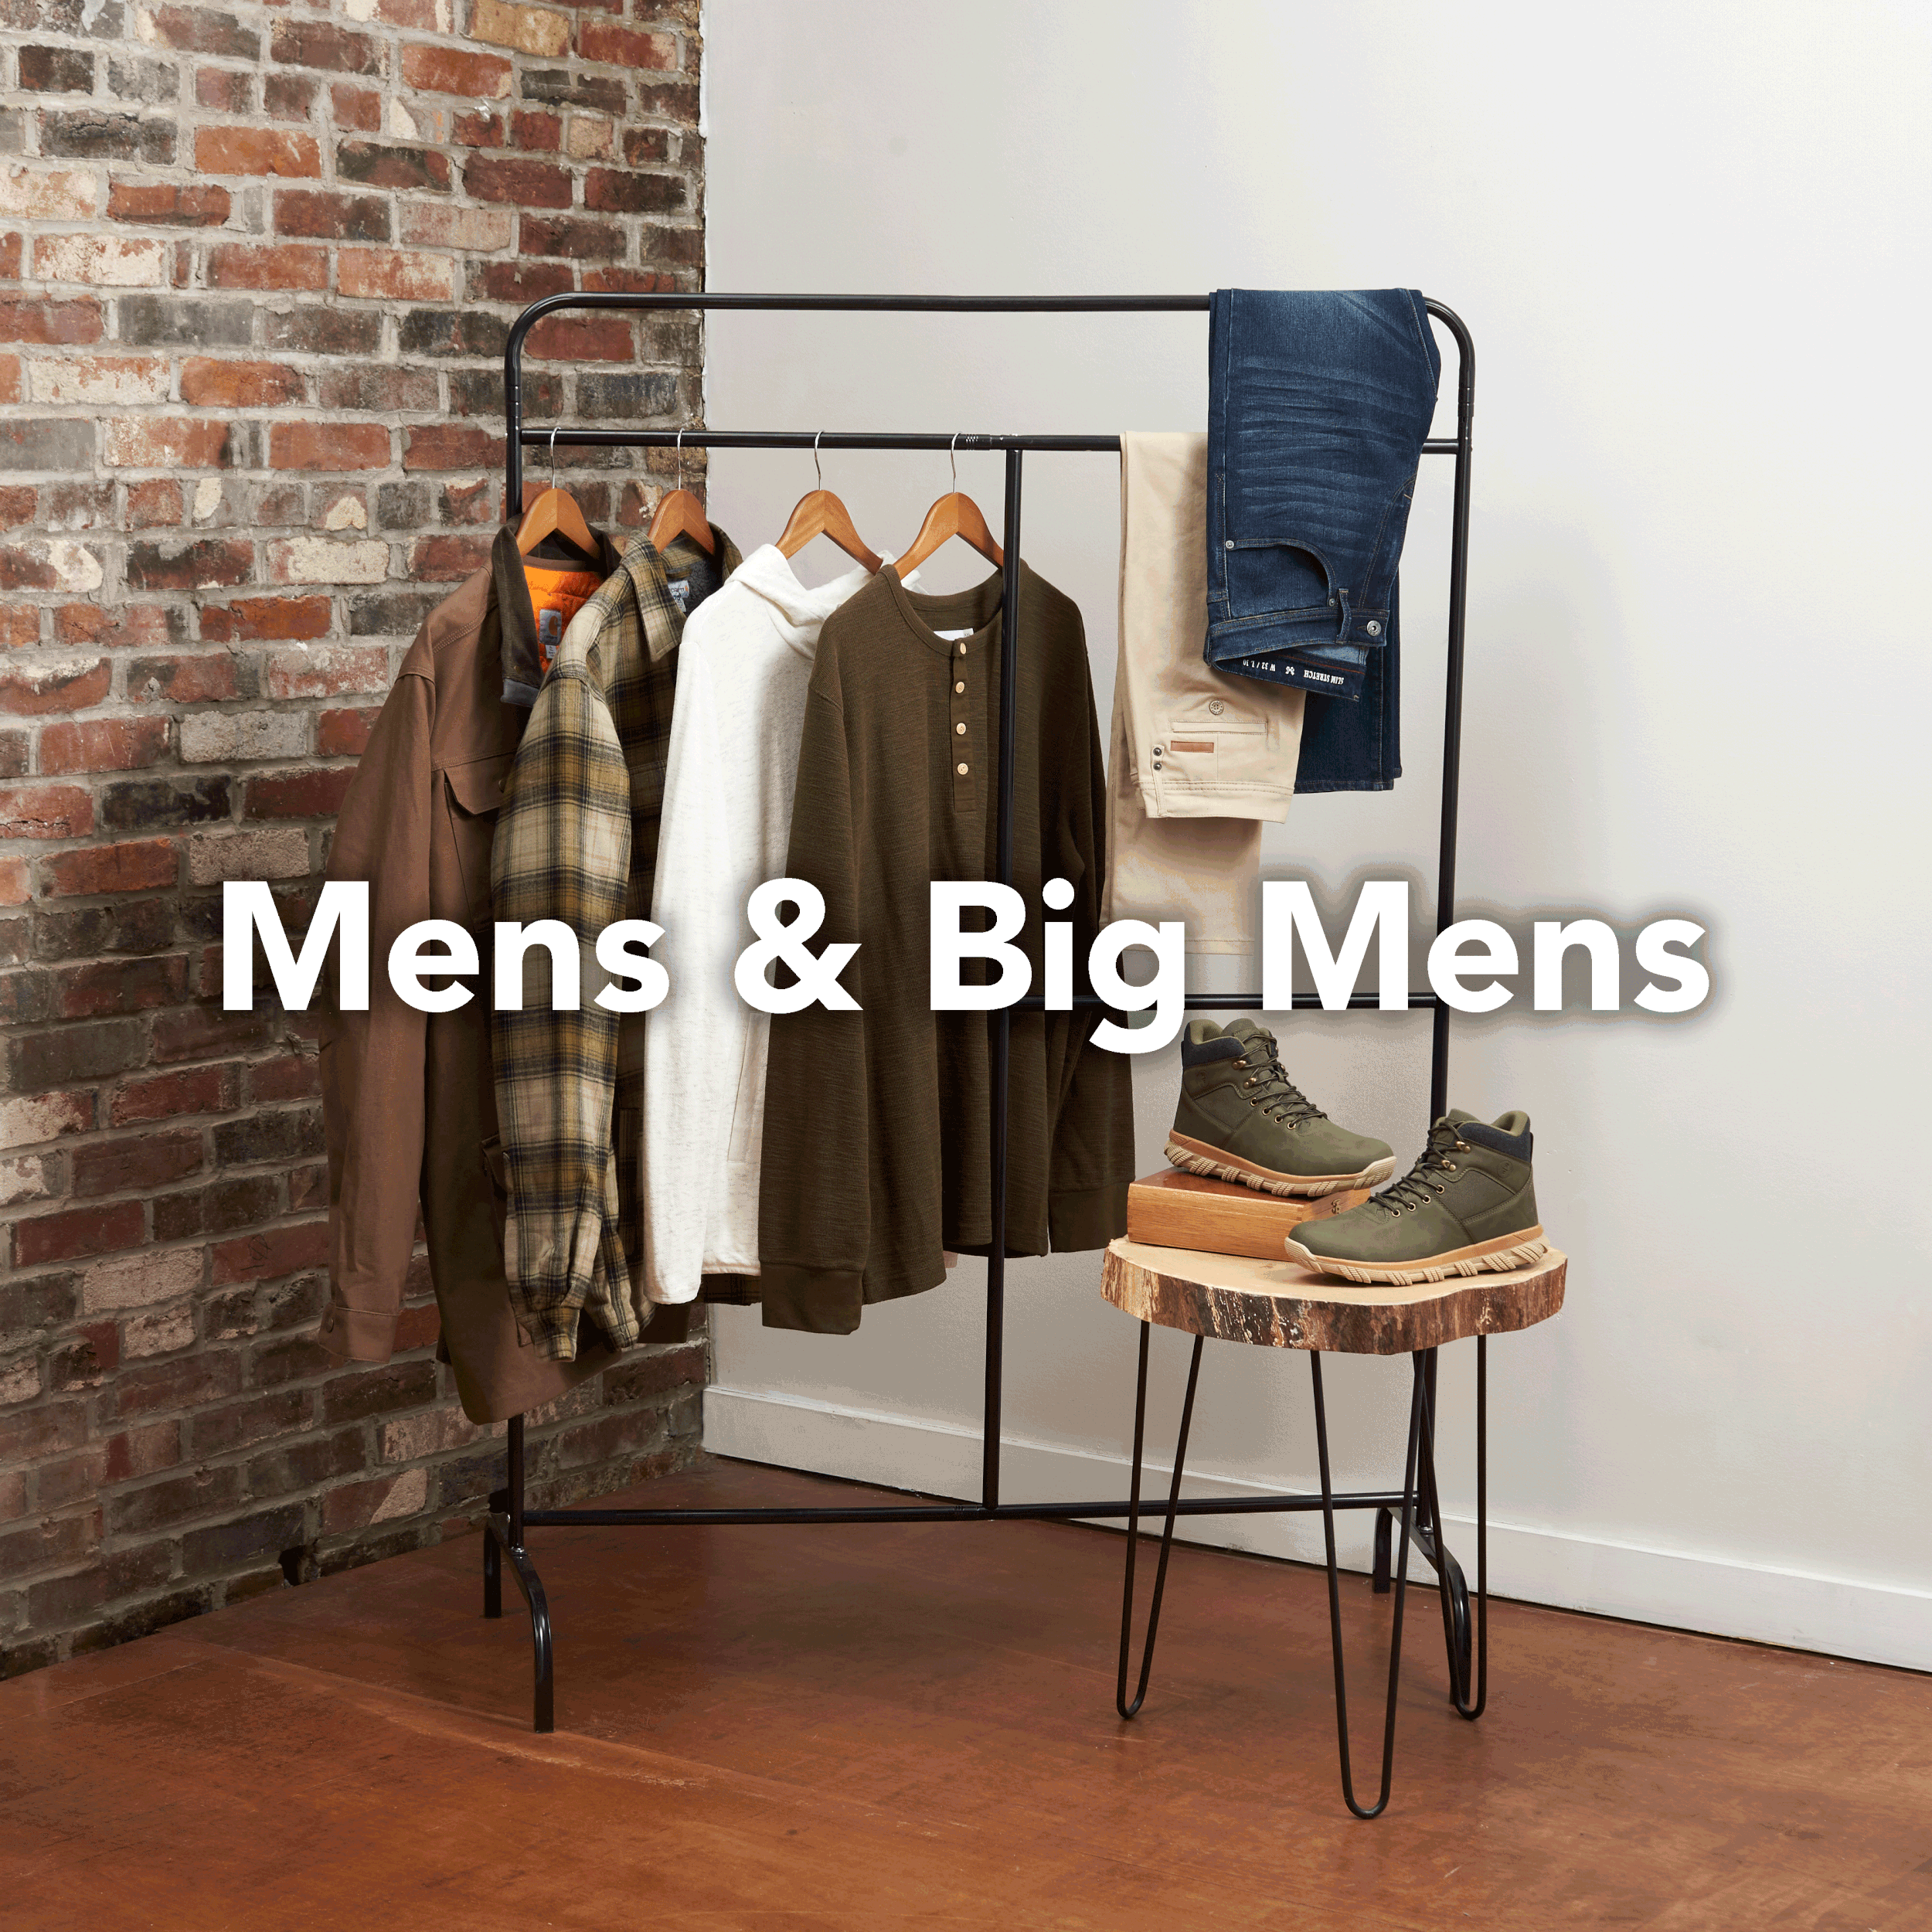 View All Men's Shoes, Apparel & Accessories